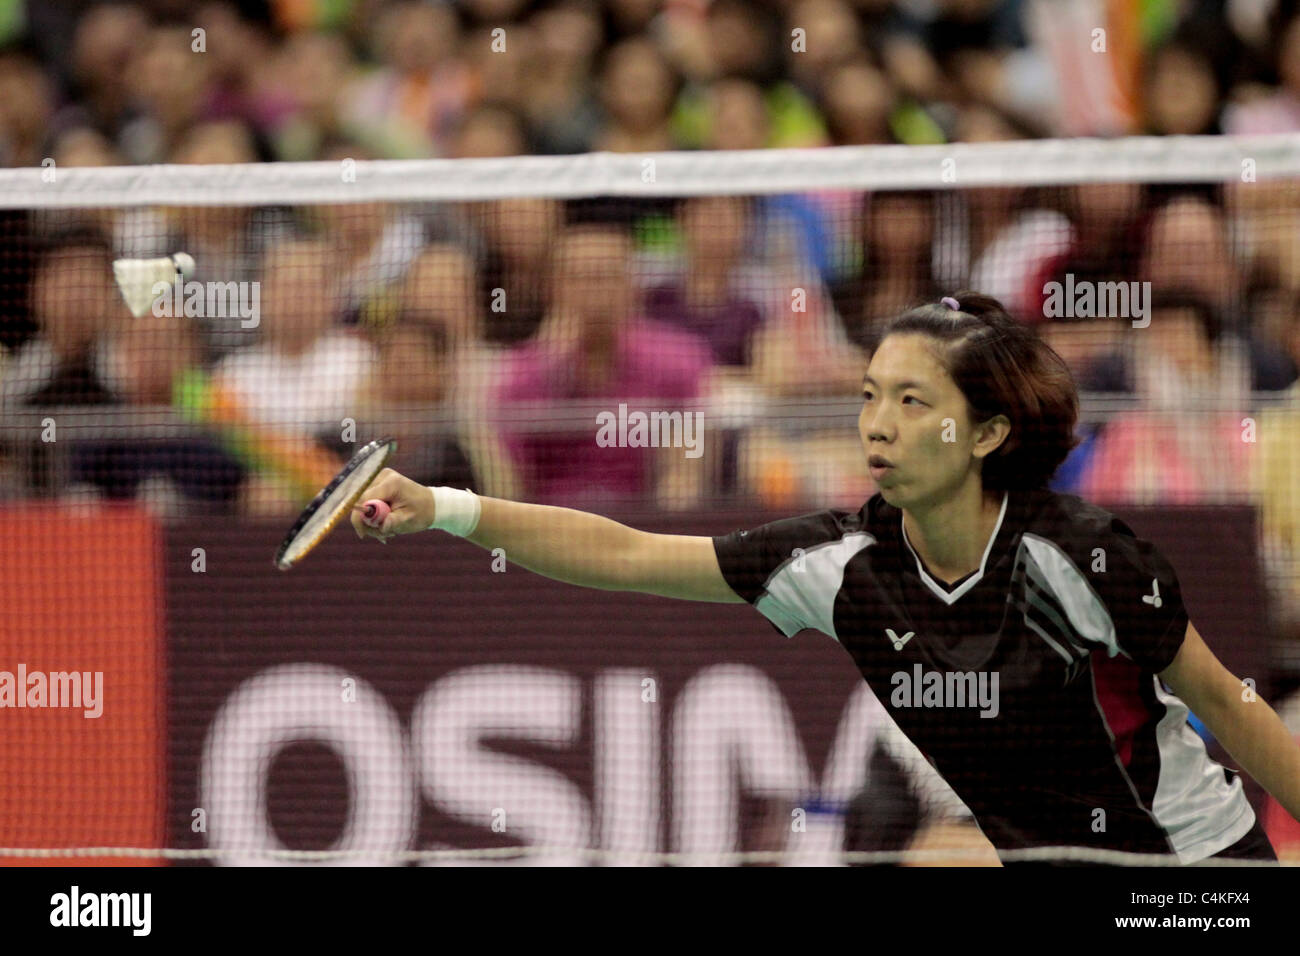 Cheng Wen Hsing of Chinese Taipei in action during their Mixed Double Finals in the Li-Ning Singapore Open 2011. Stock Photo